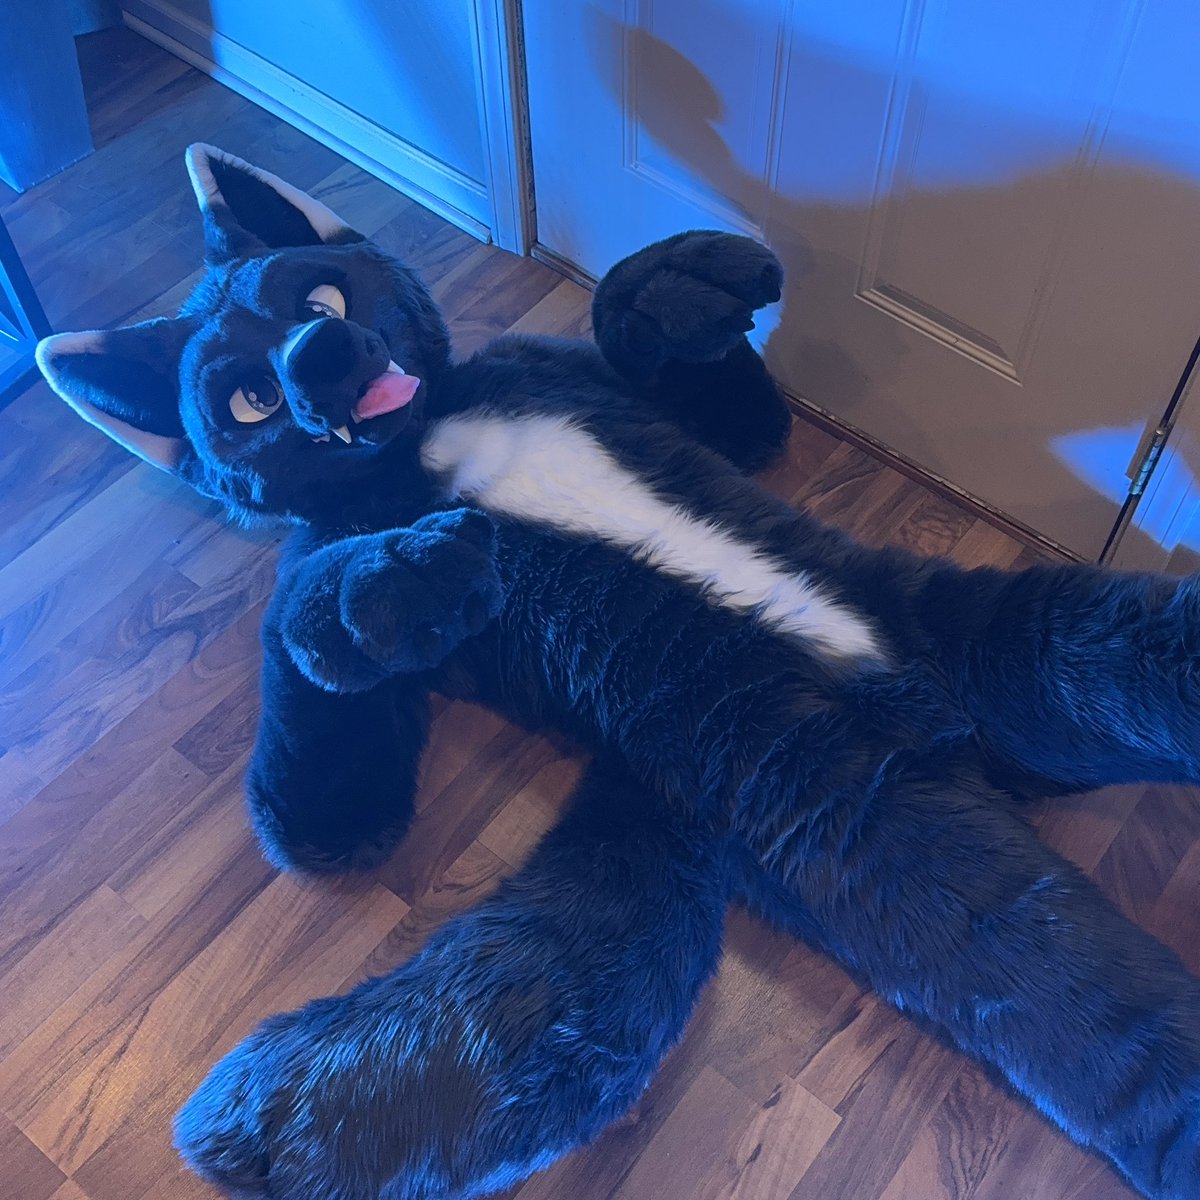 Waiting for you to walk in the door like: #fursuitfriday